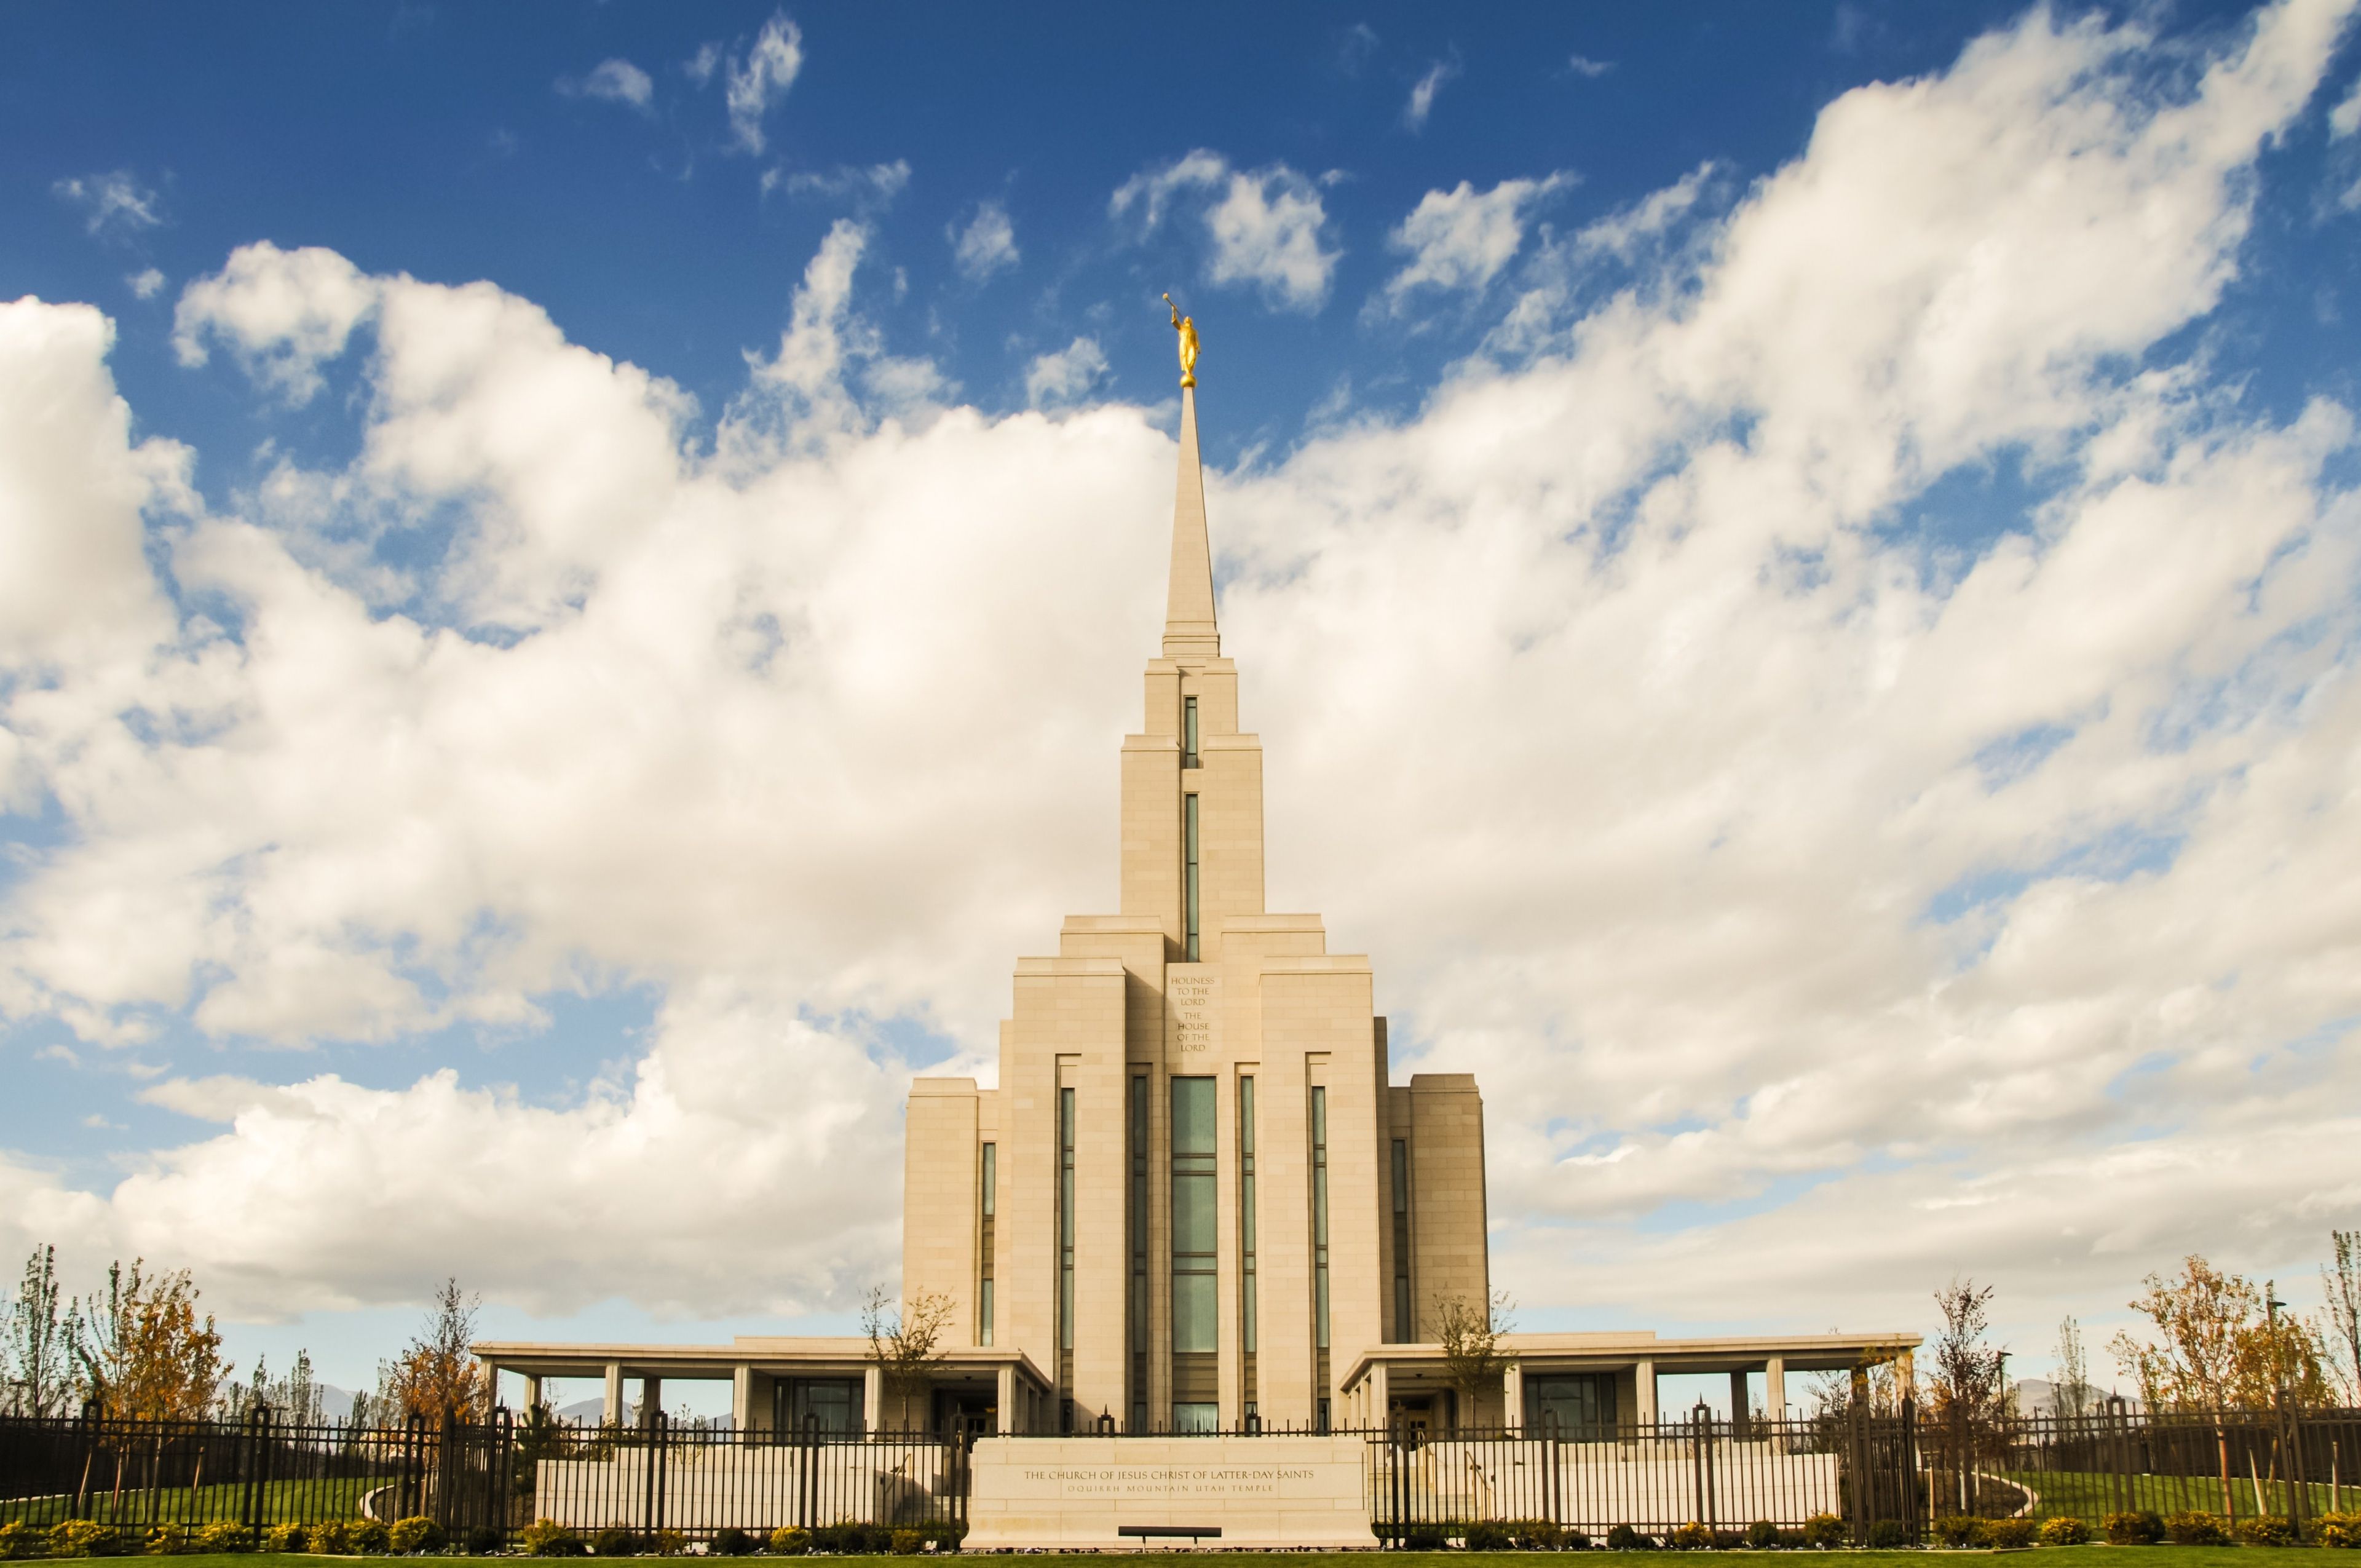 The entire Oquirrh Mountain Utah Temple, including the entrance, name sign, and scenery.